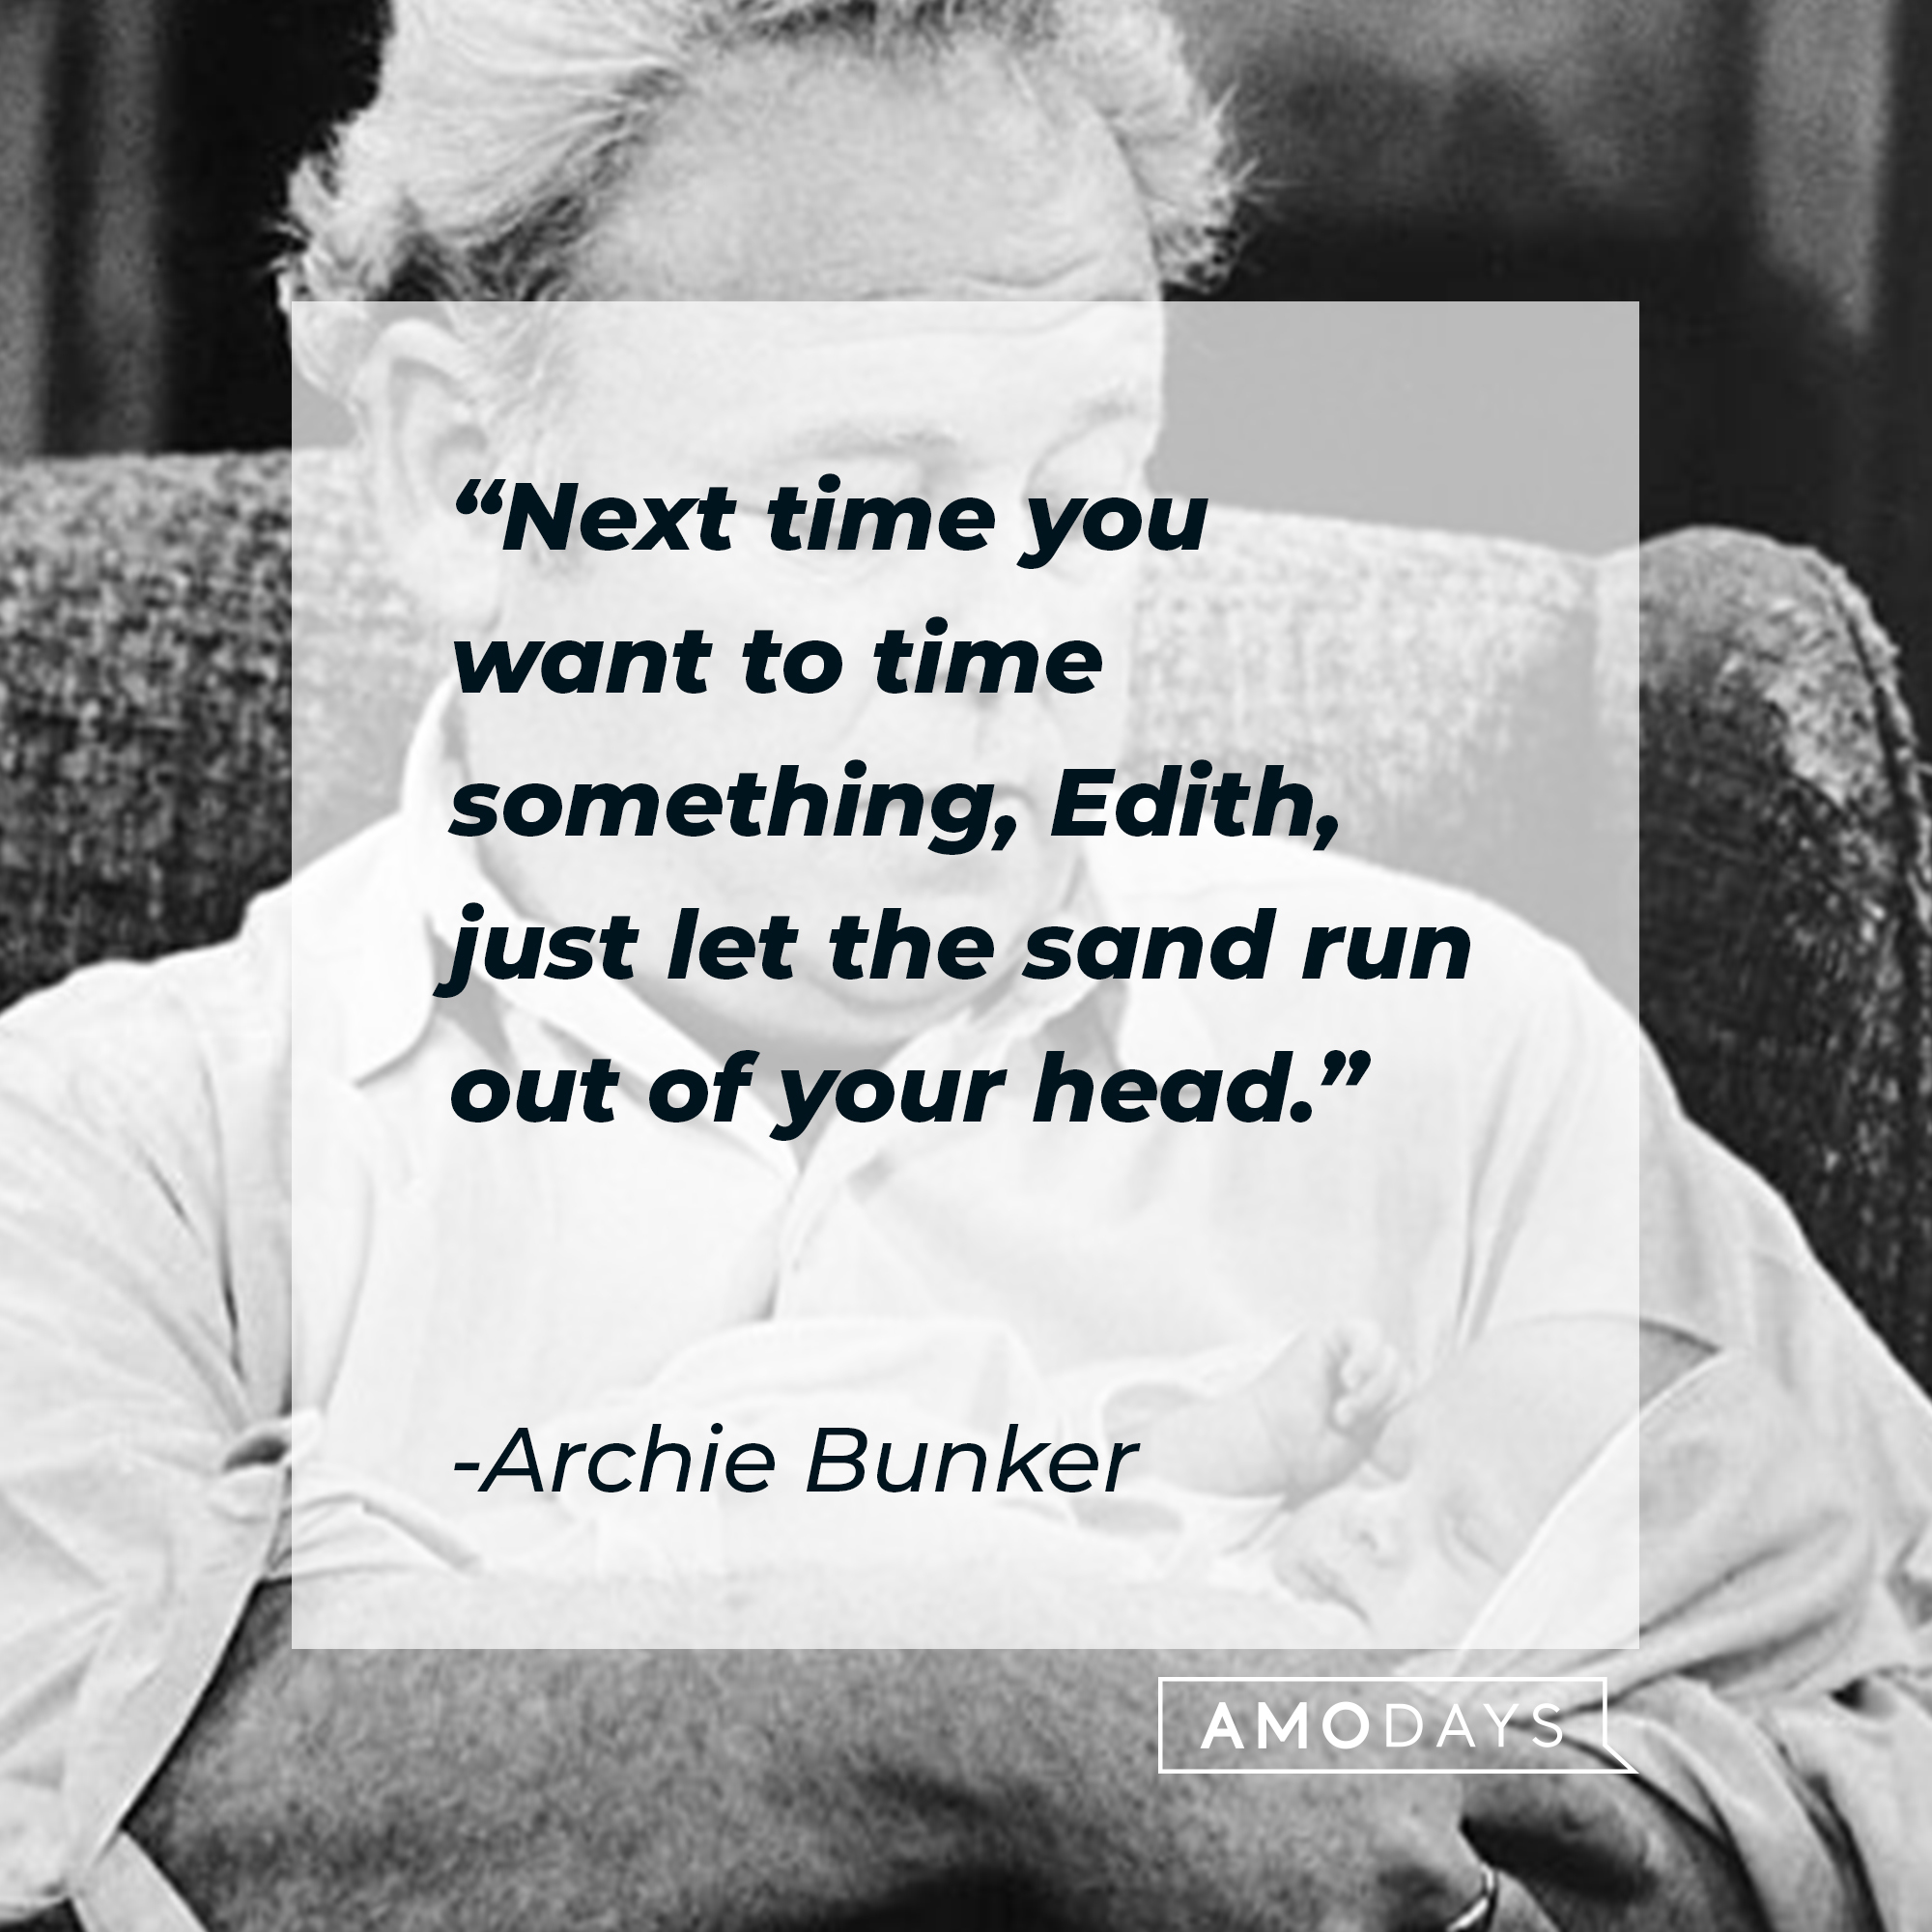 Archie Bunker's quote, "Next time you want to time something, Edith, just let the sand run out of your head." | Source: Getty Images